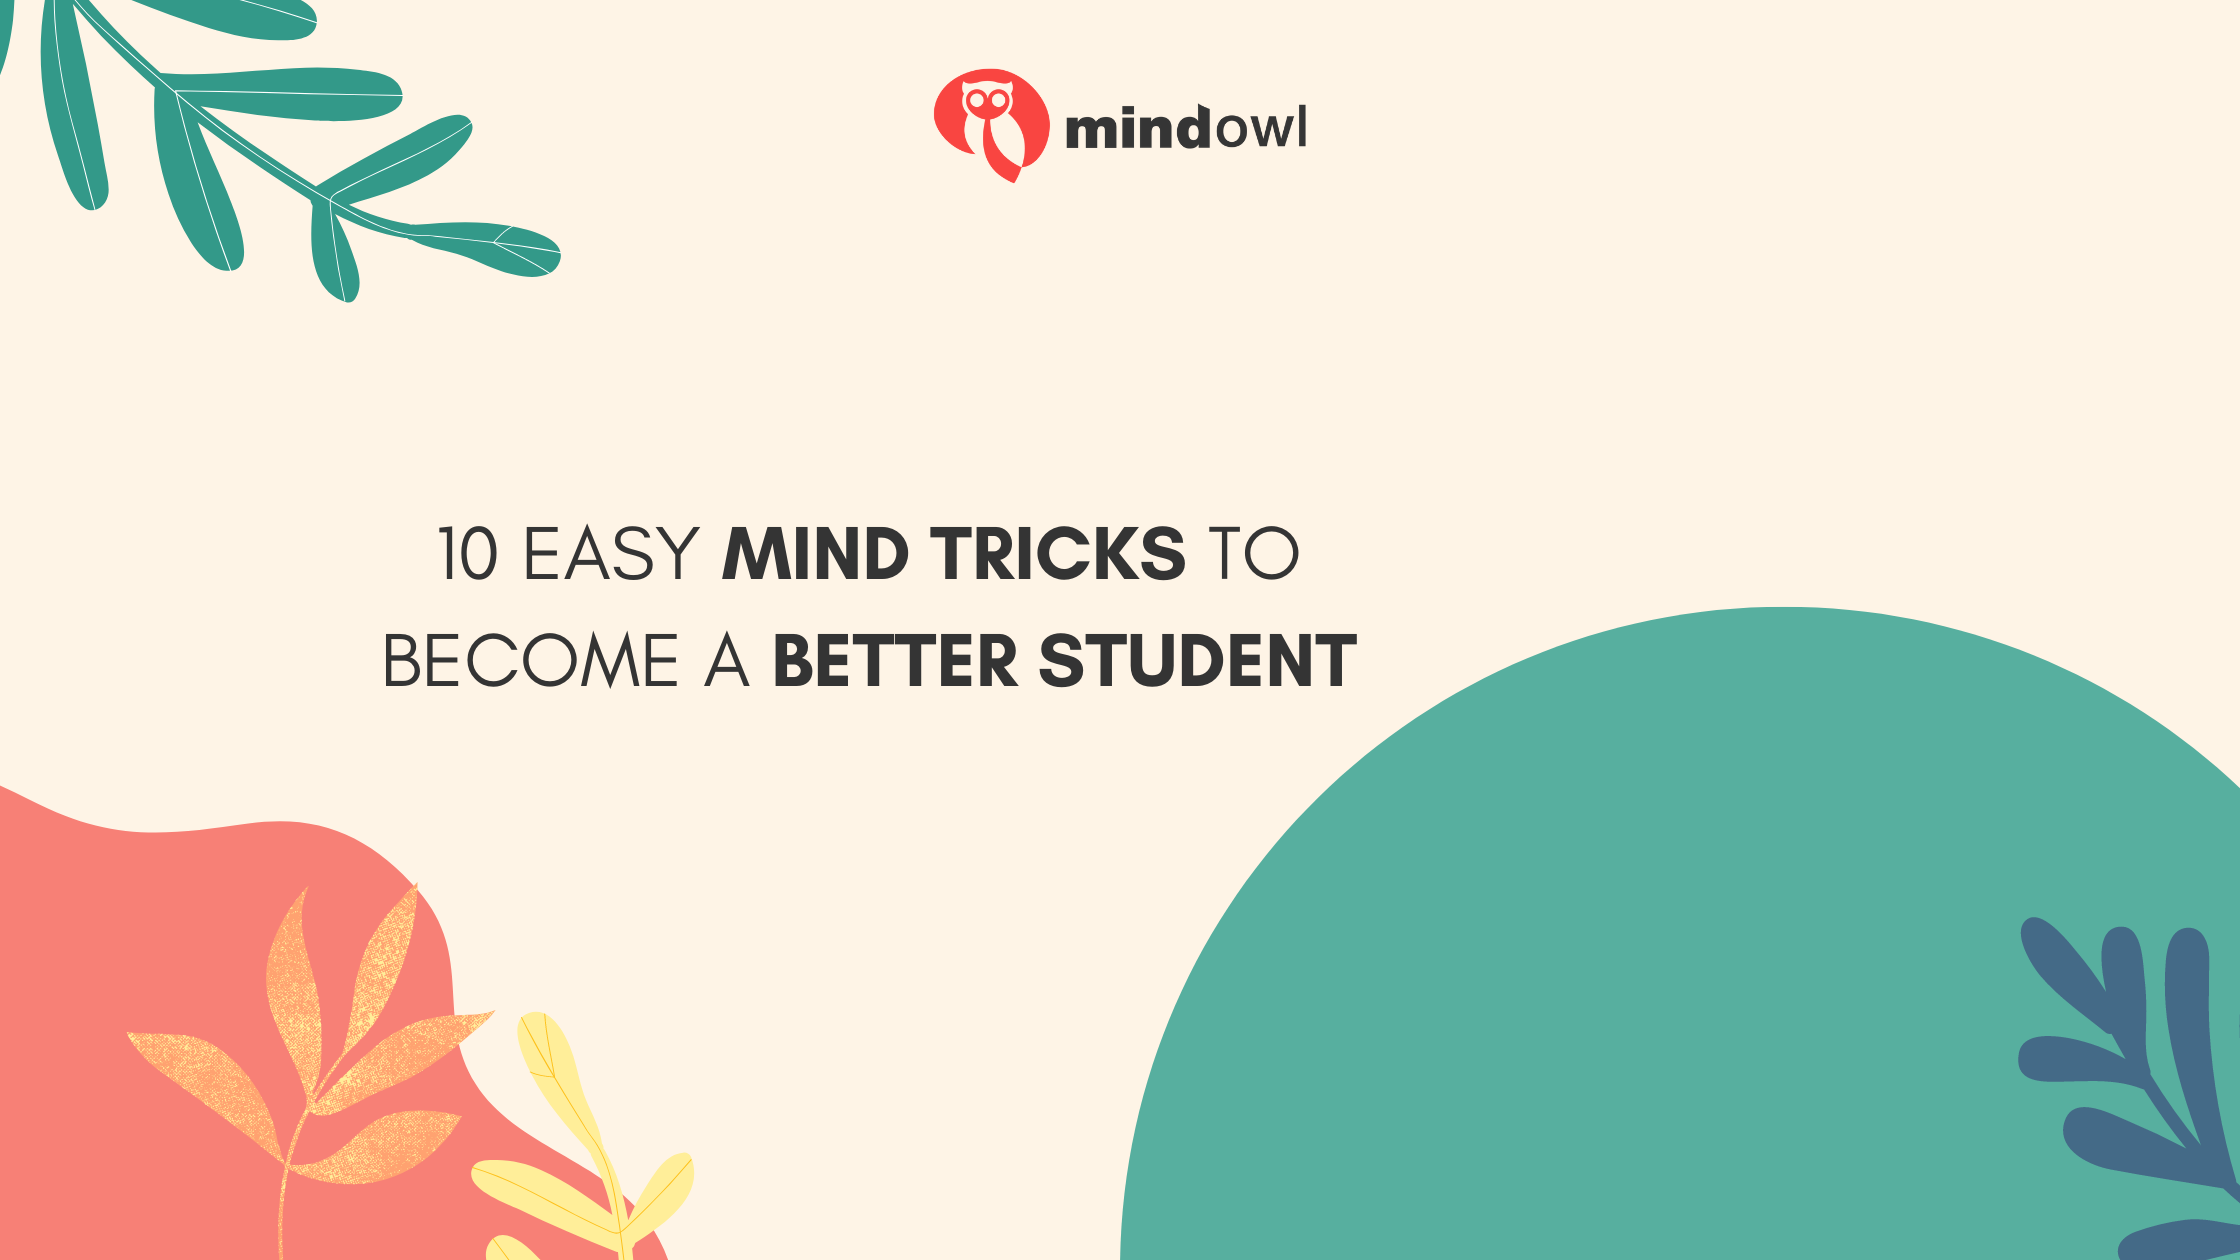 10 Easy Mind Tricks to Become a Better Student